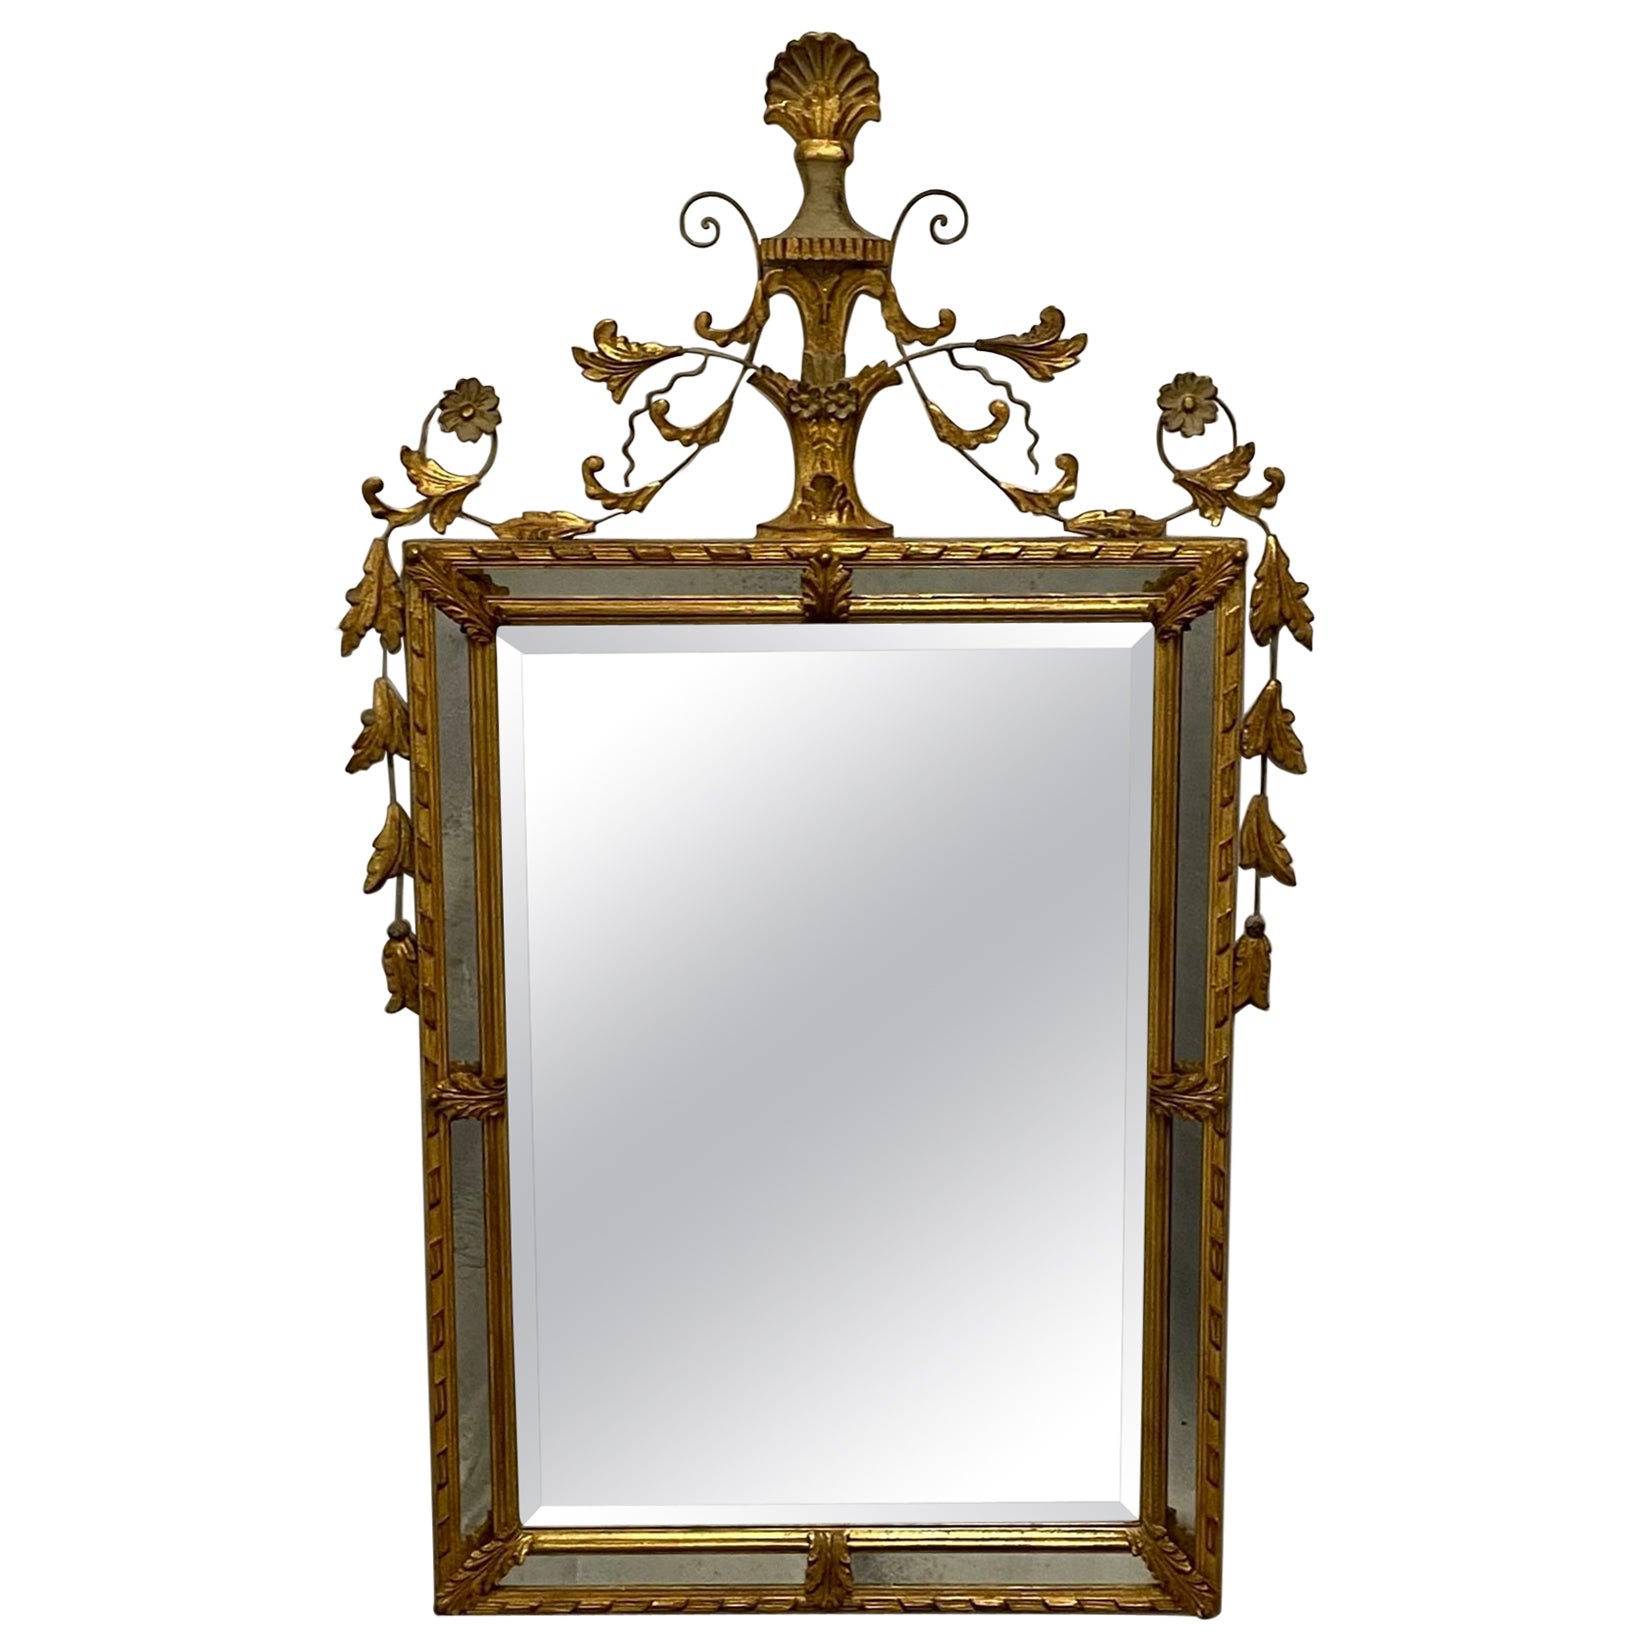 Adams Style Wall / Console / Pier Mirror, Giltwood, Floral Motif For Sale